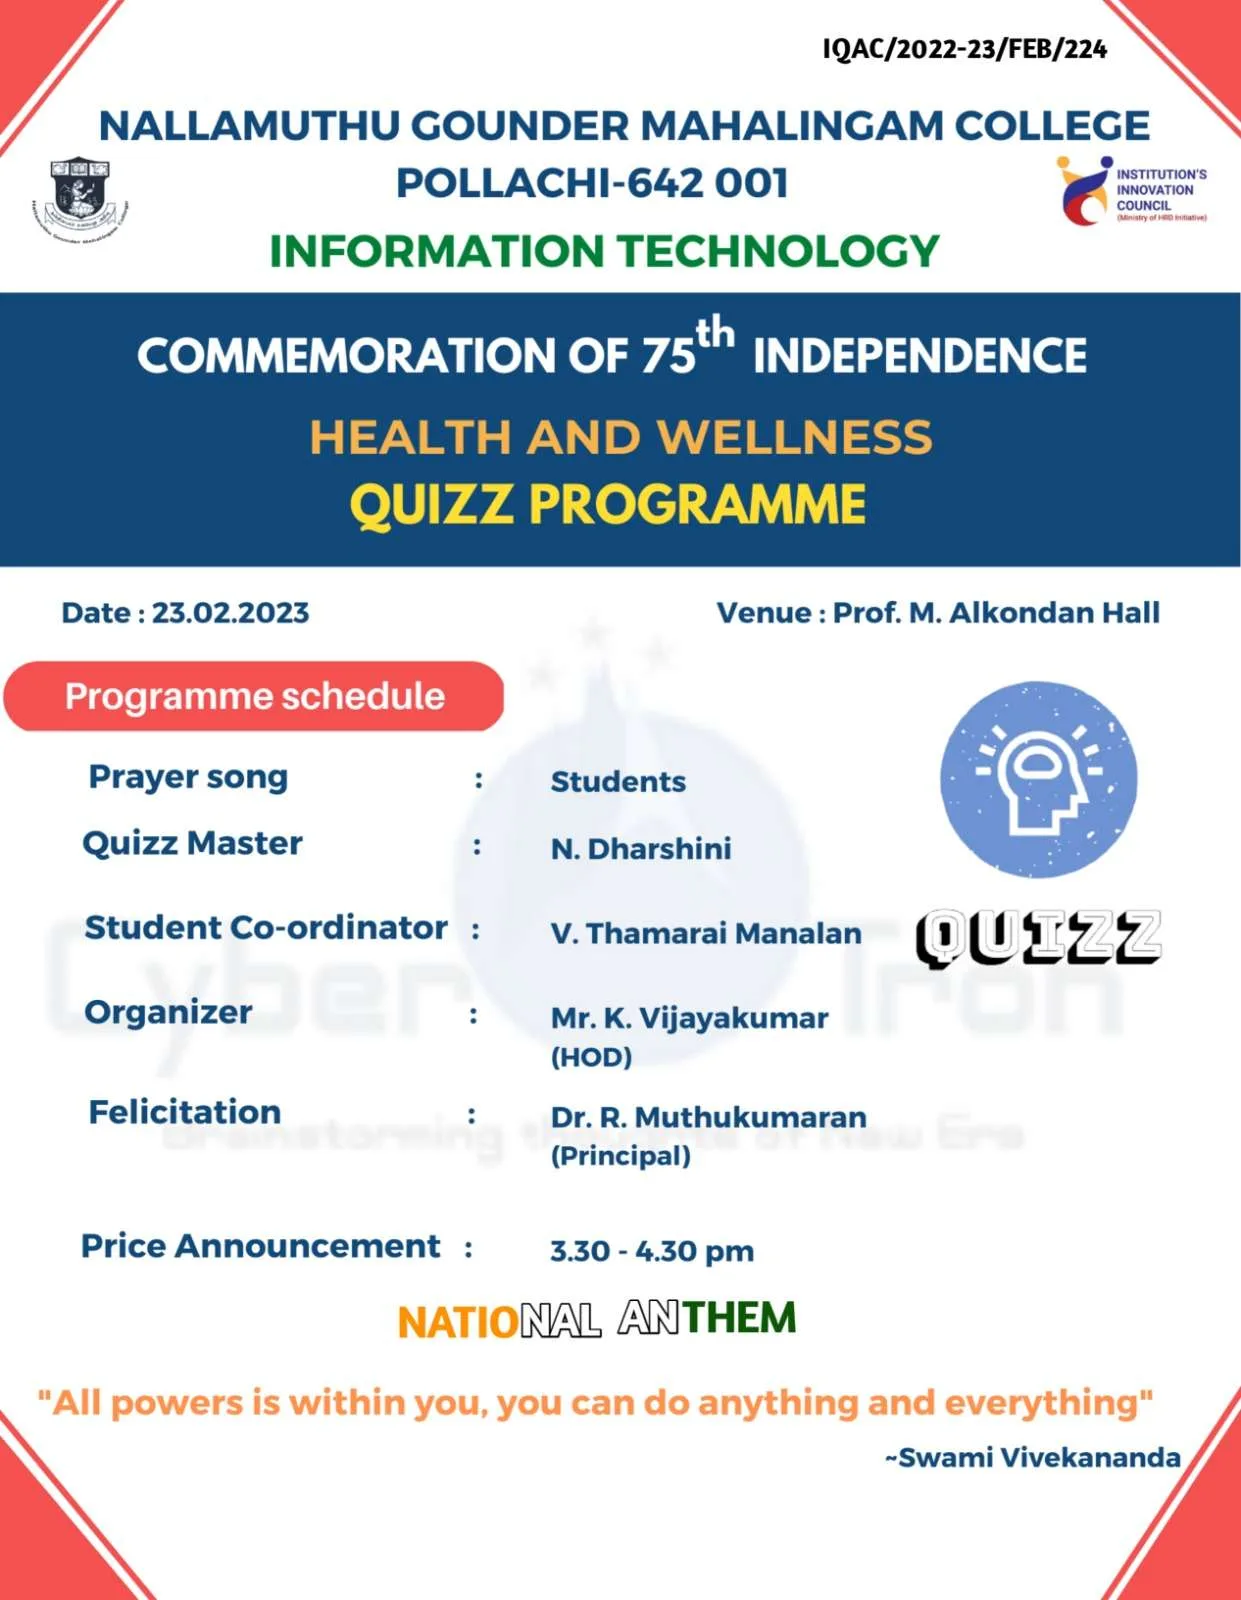 HEALTH AND WELLNESS QUIZZ PROGRAMME